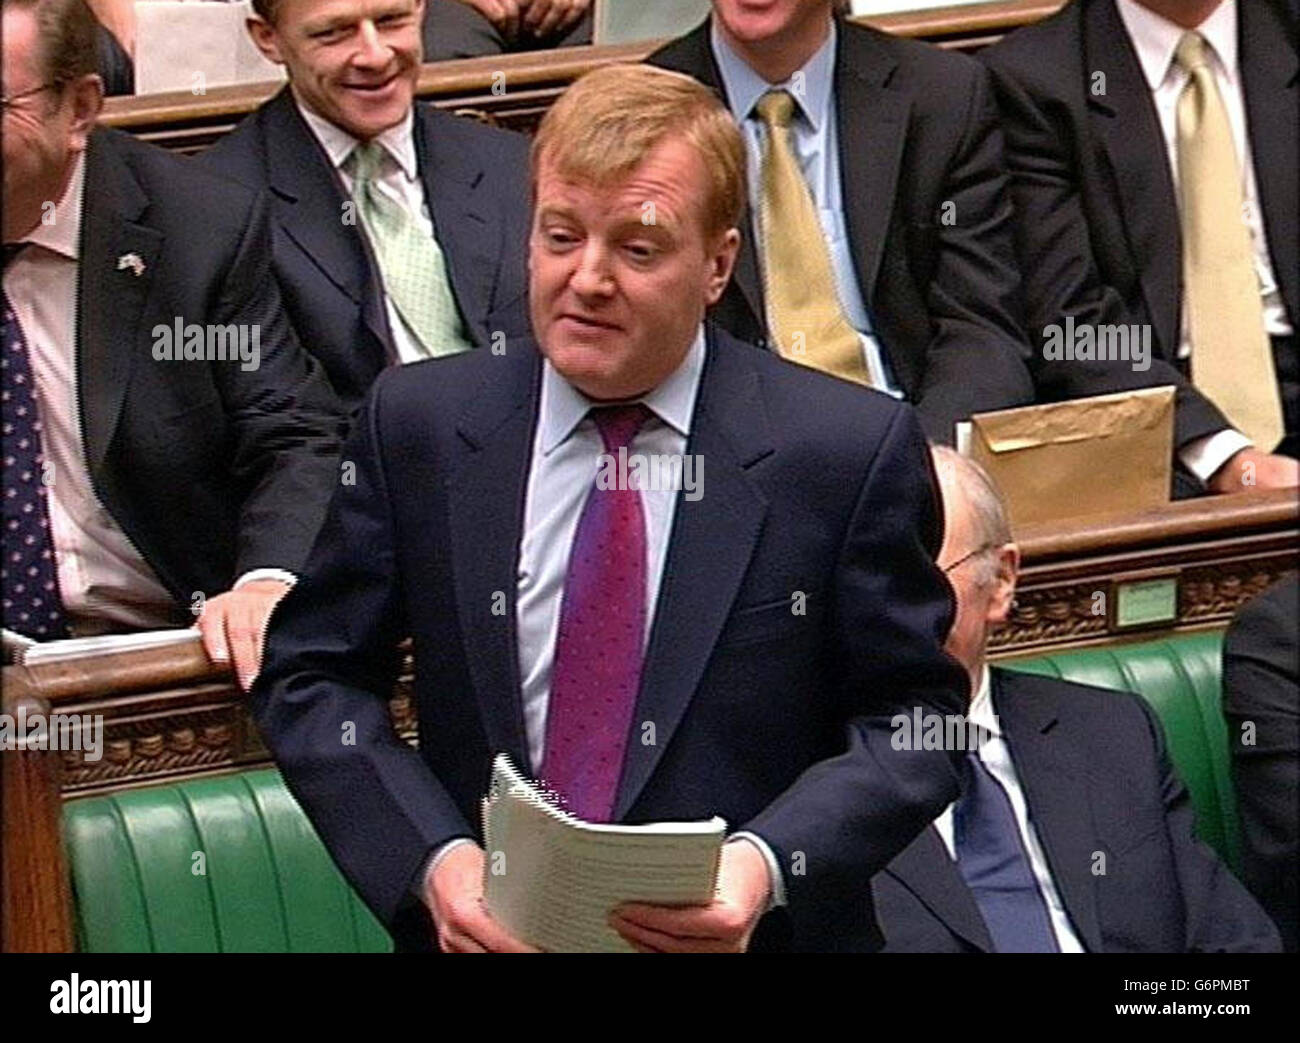 Liberal Democrat leader, Charles Kennedy, questioning Prime Minister Tony Blair during his regular weekly Question Time in the House of Commons, London. Mr Kennedy was among MP's who challenged the Prime Minister ahead of the formal publication of the Hutton report into the circumstances surrounding the death of Government weapons expert Dr David Kelly. Stock Photo